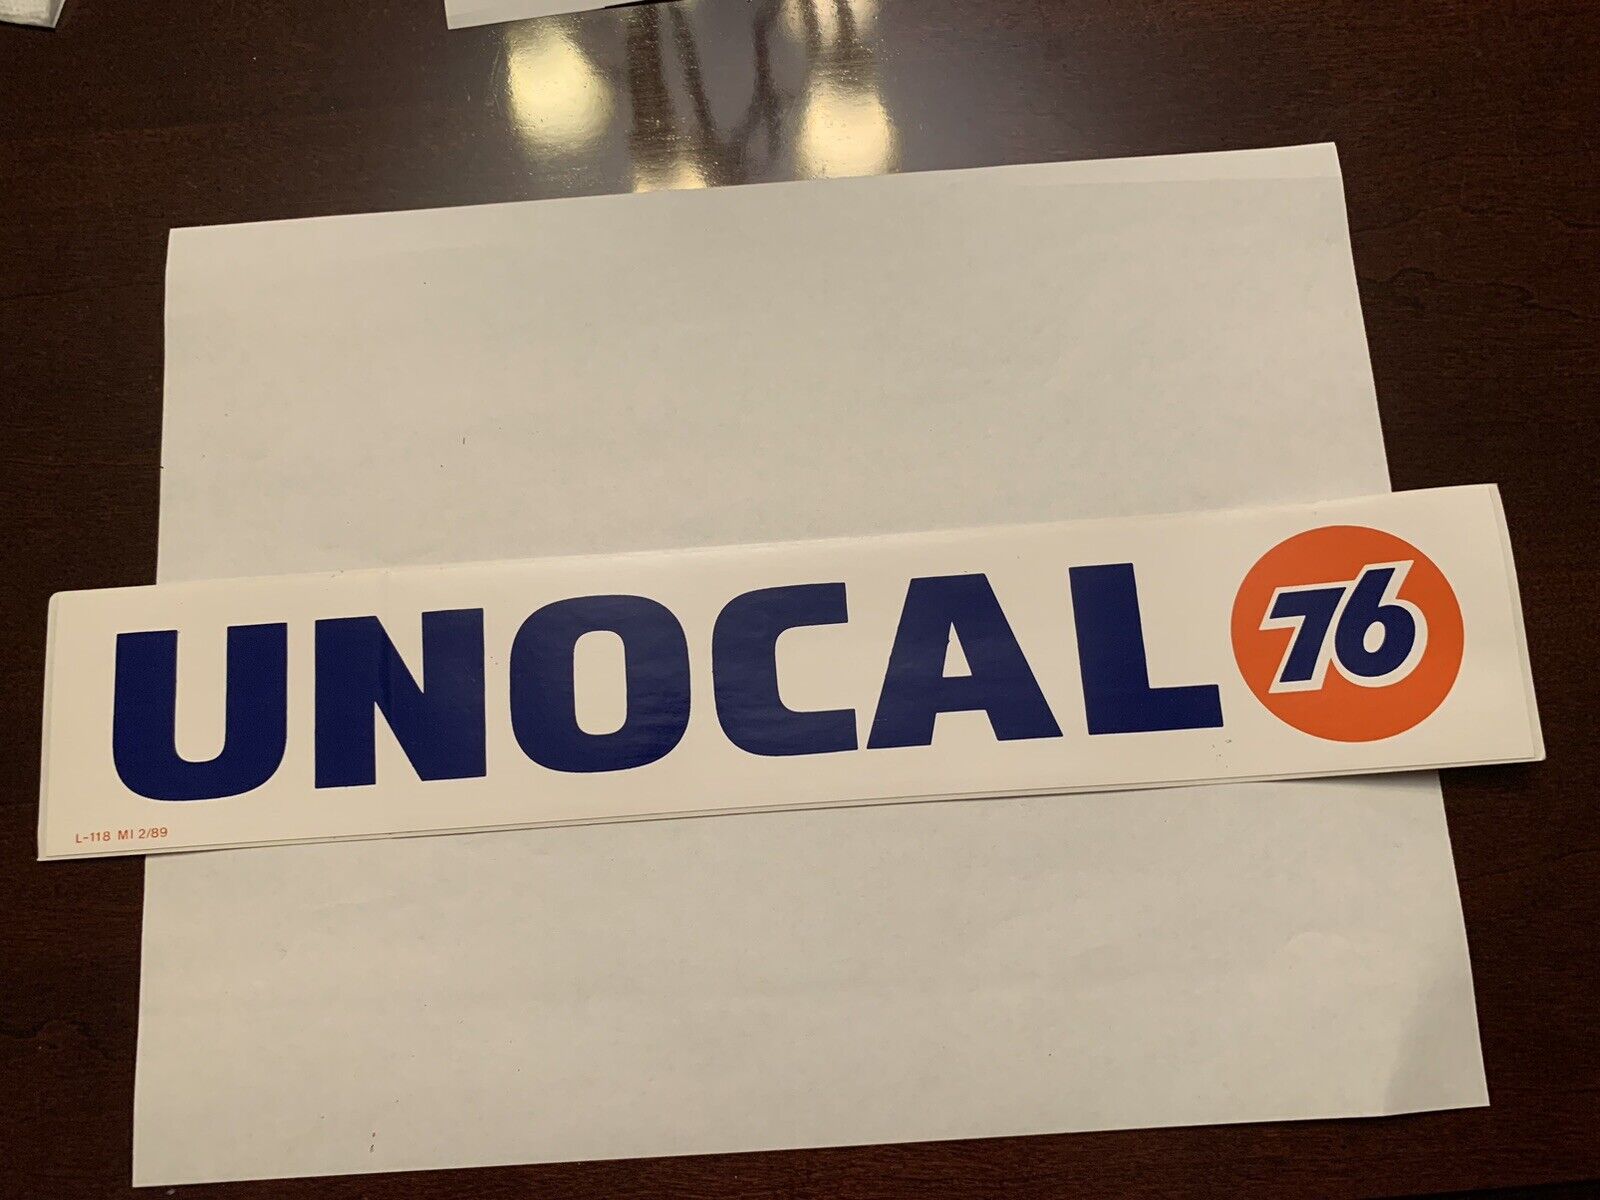 Vintage UNOCAL 76 Decal (1) - Large